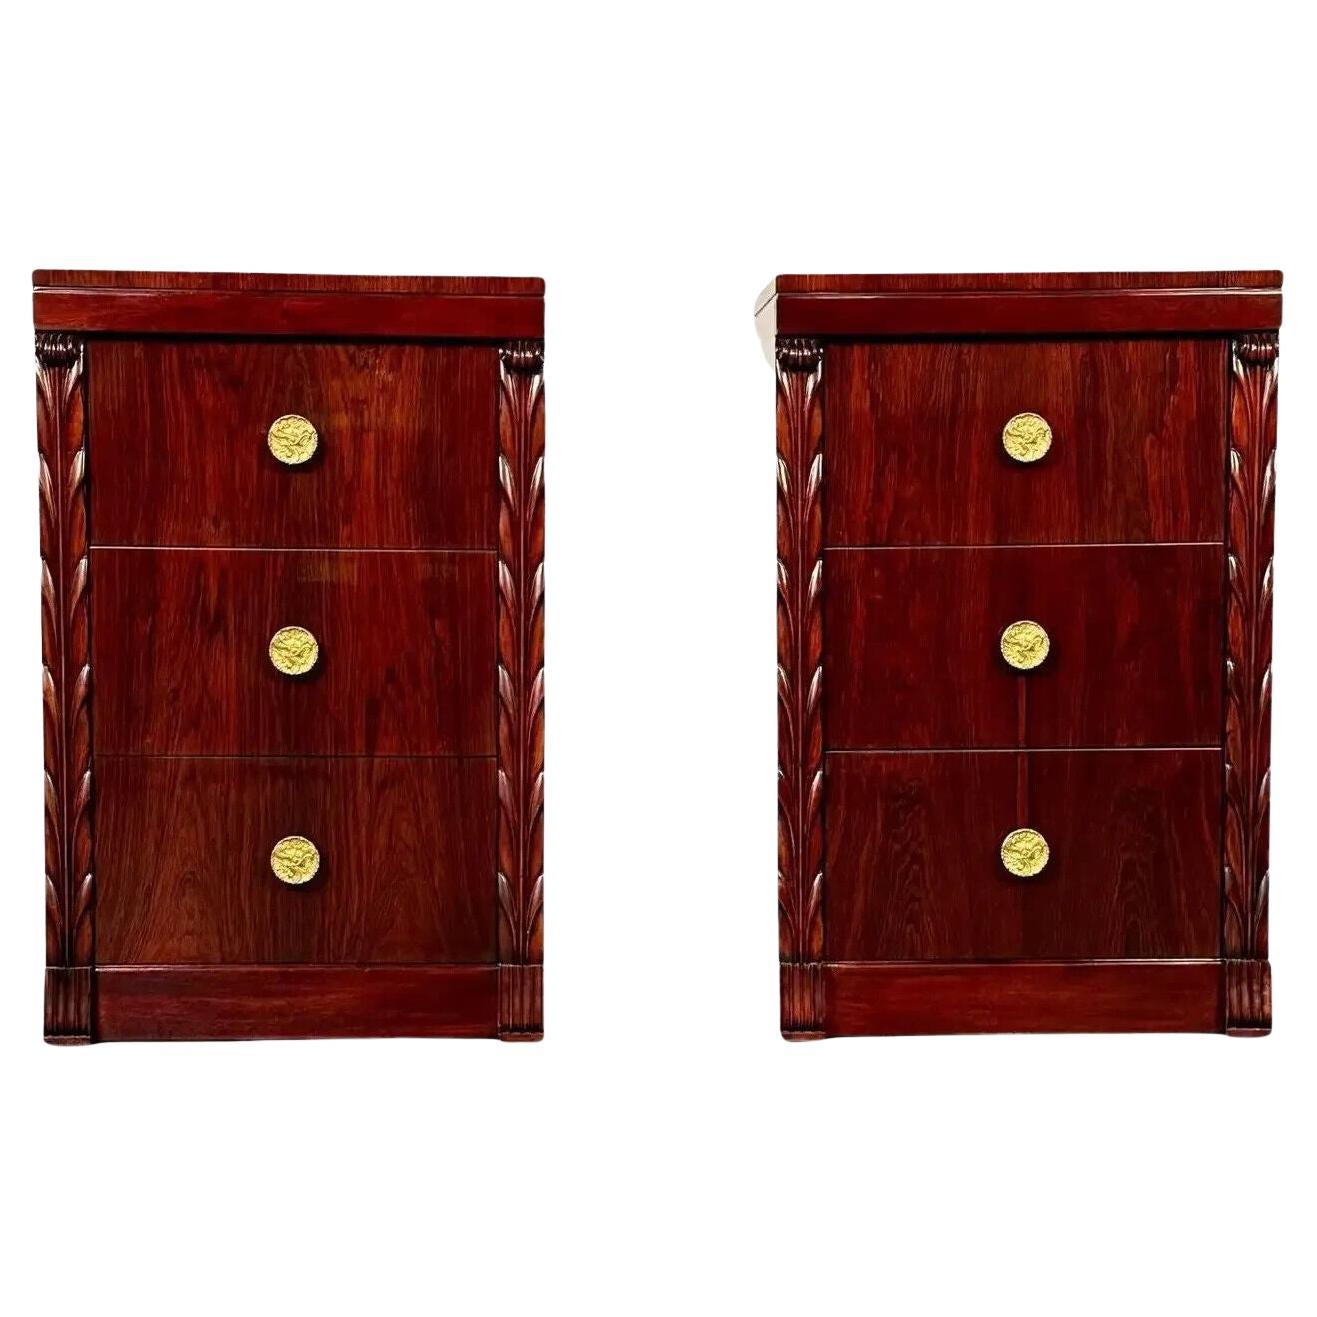 Midcentury Nightstands Side Tables in Rosewood by John Stuart For Sale